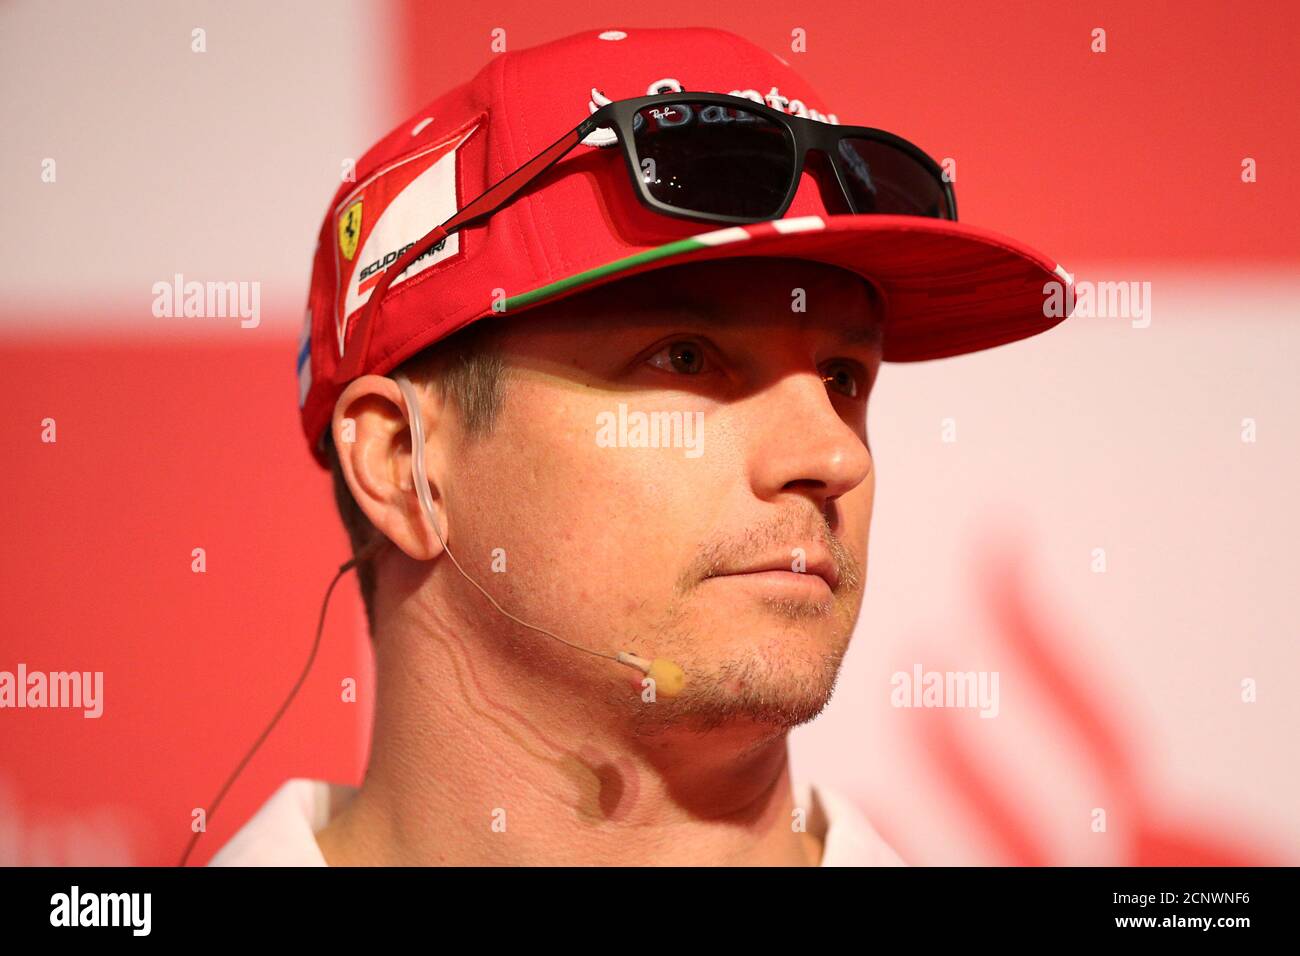 Ferrari's Kimi Raikkonen of Finland  is pictured on a racing simulator ahead of the Mexican F1 Grand Prix on October 29, in Mexico City, Mexico, October 26, 2017. REUTERS/Edgard Garrido Stock Photo